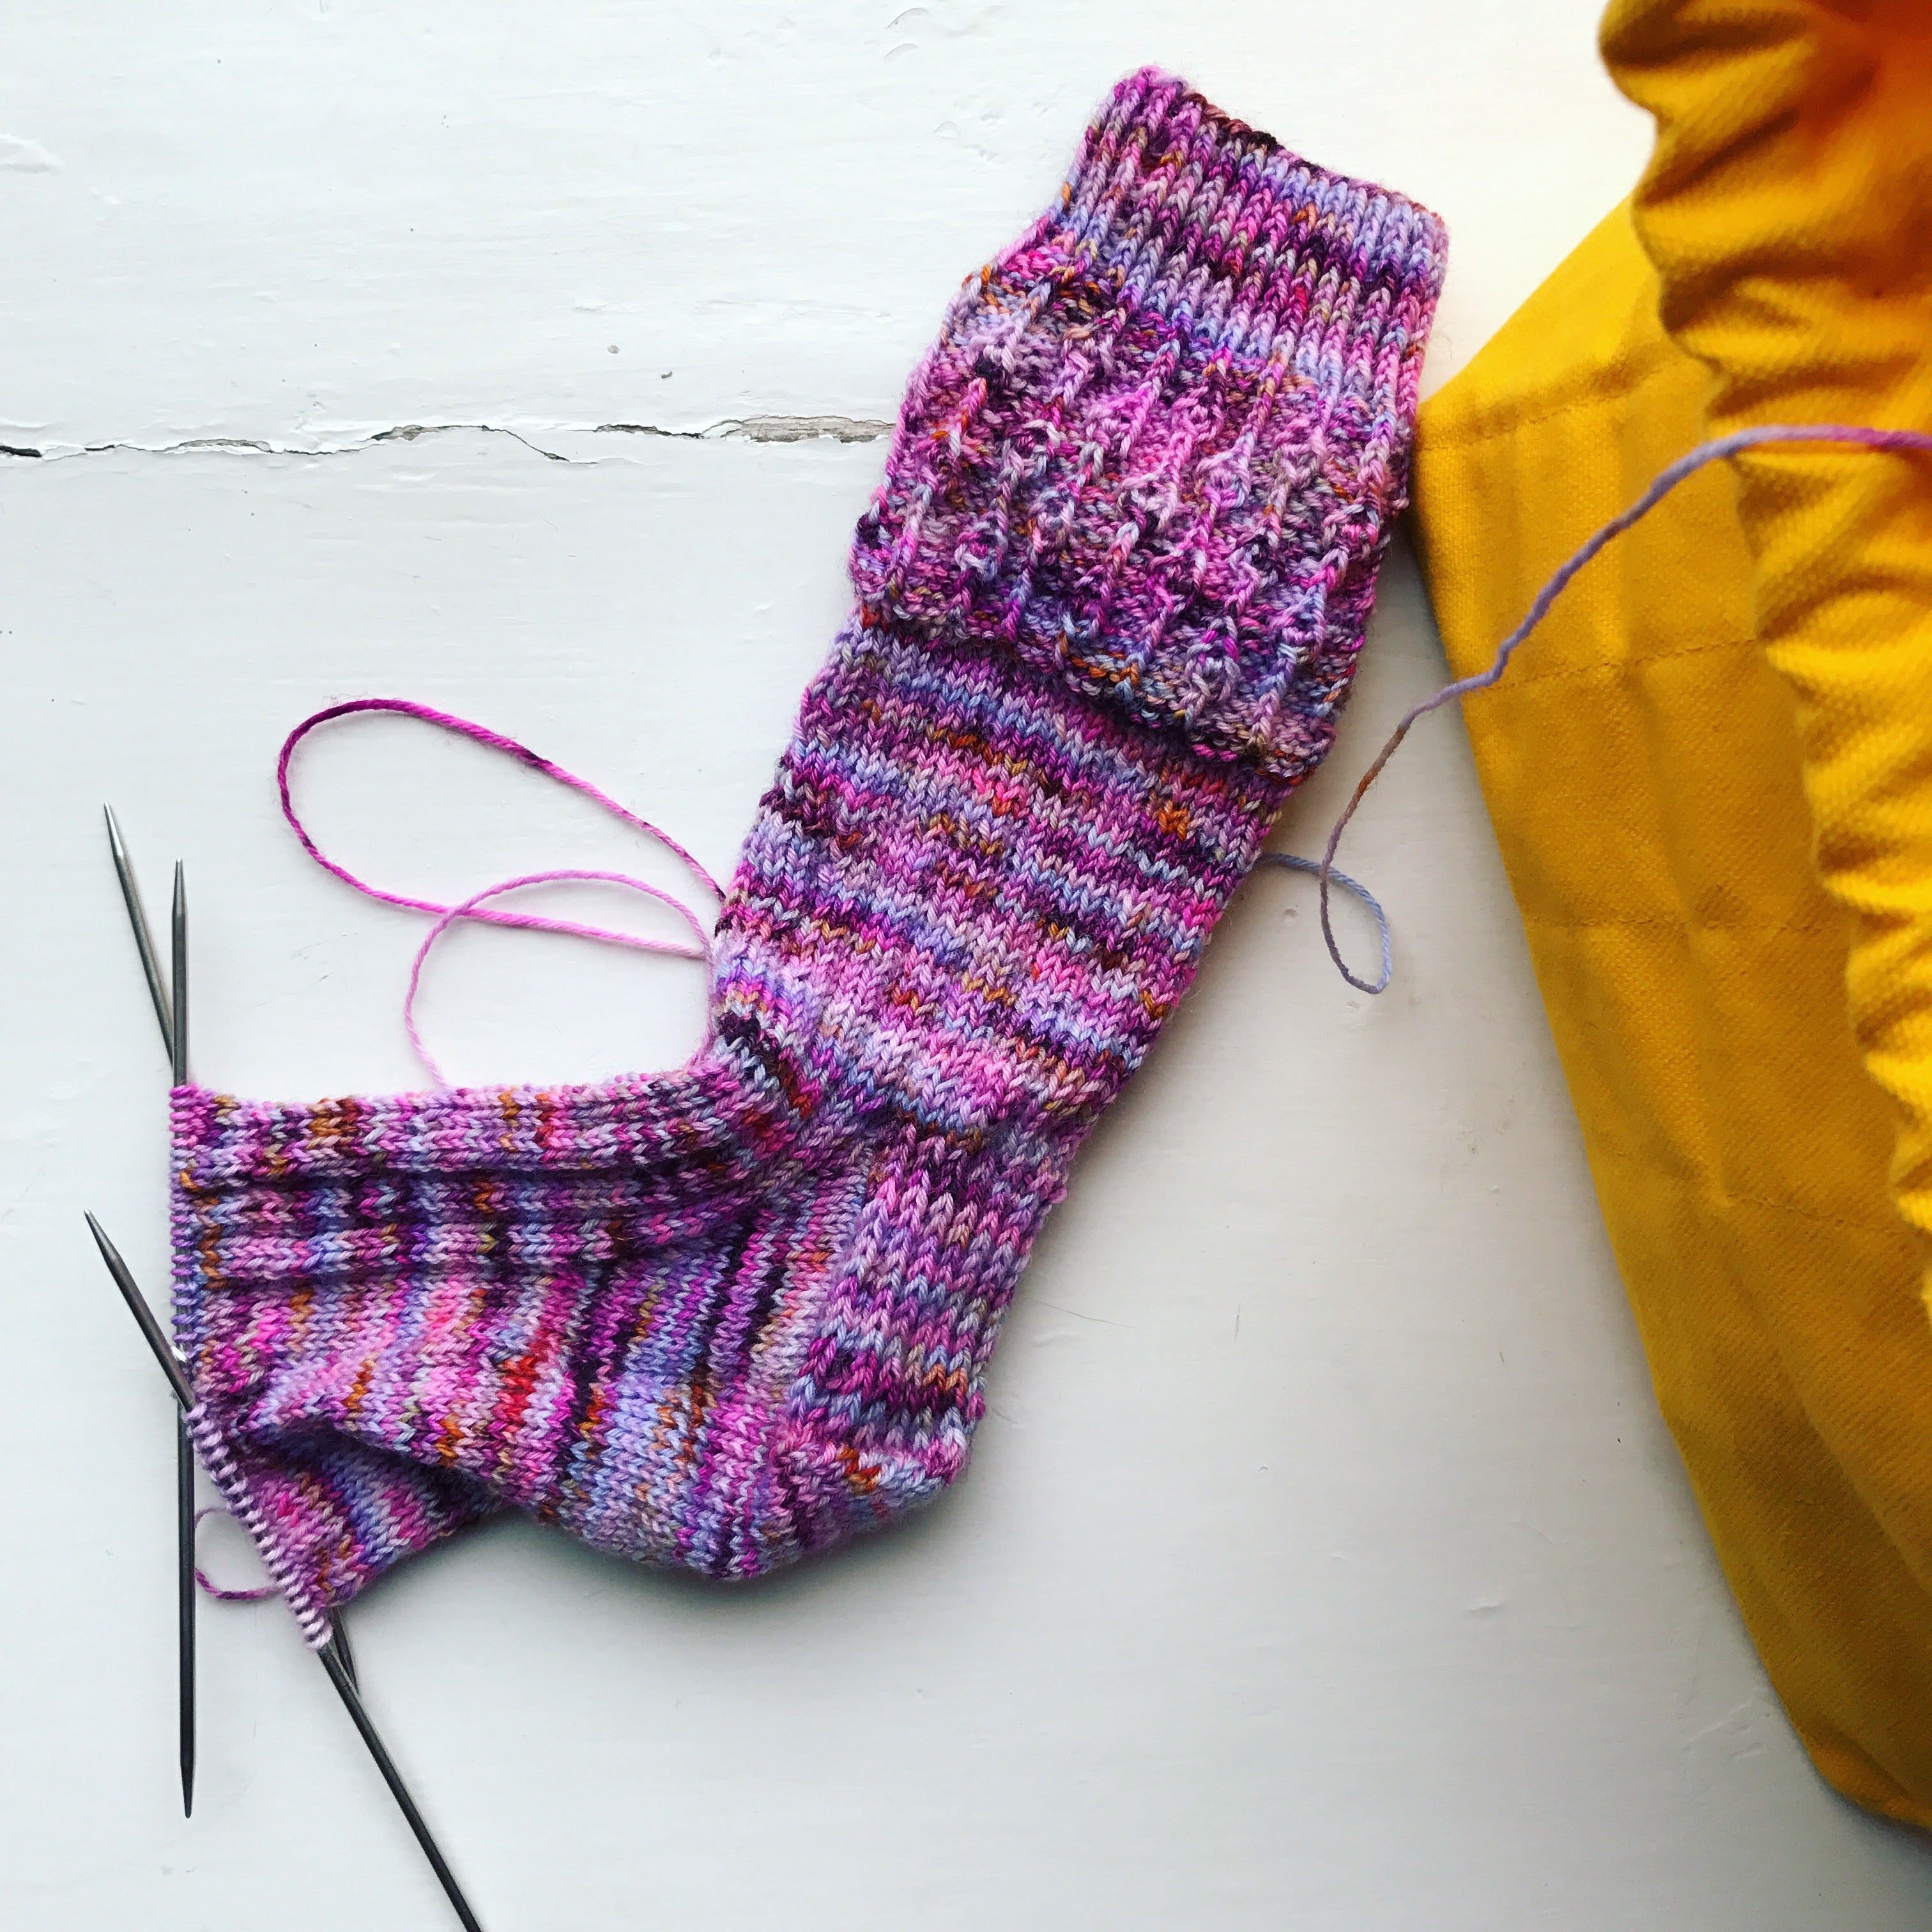 How to Knit Socks - One Sock KAL - The Fibre Co.